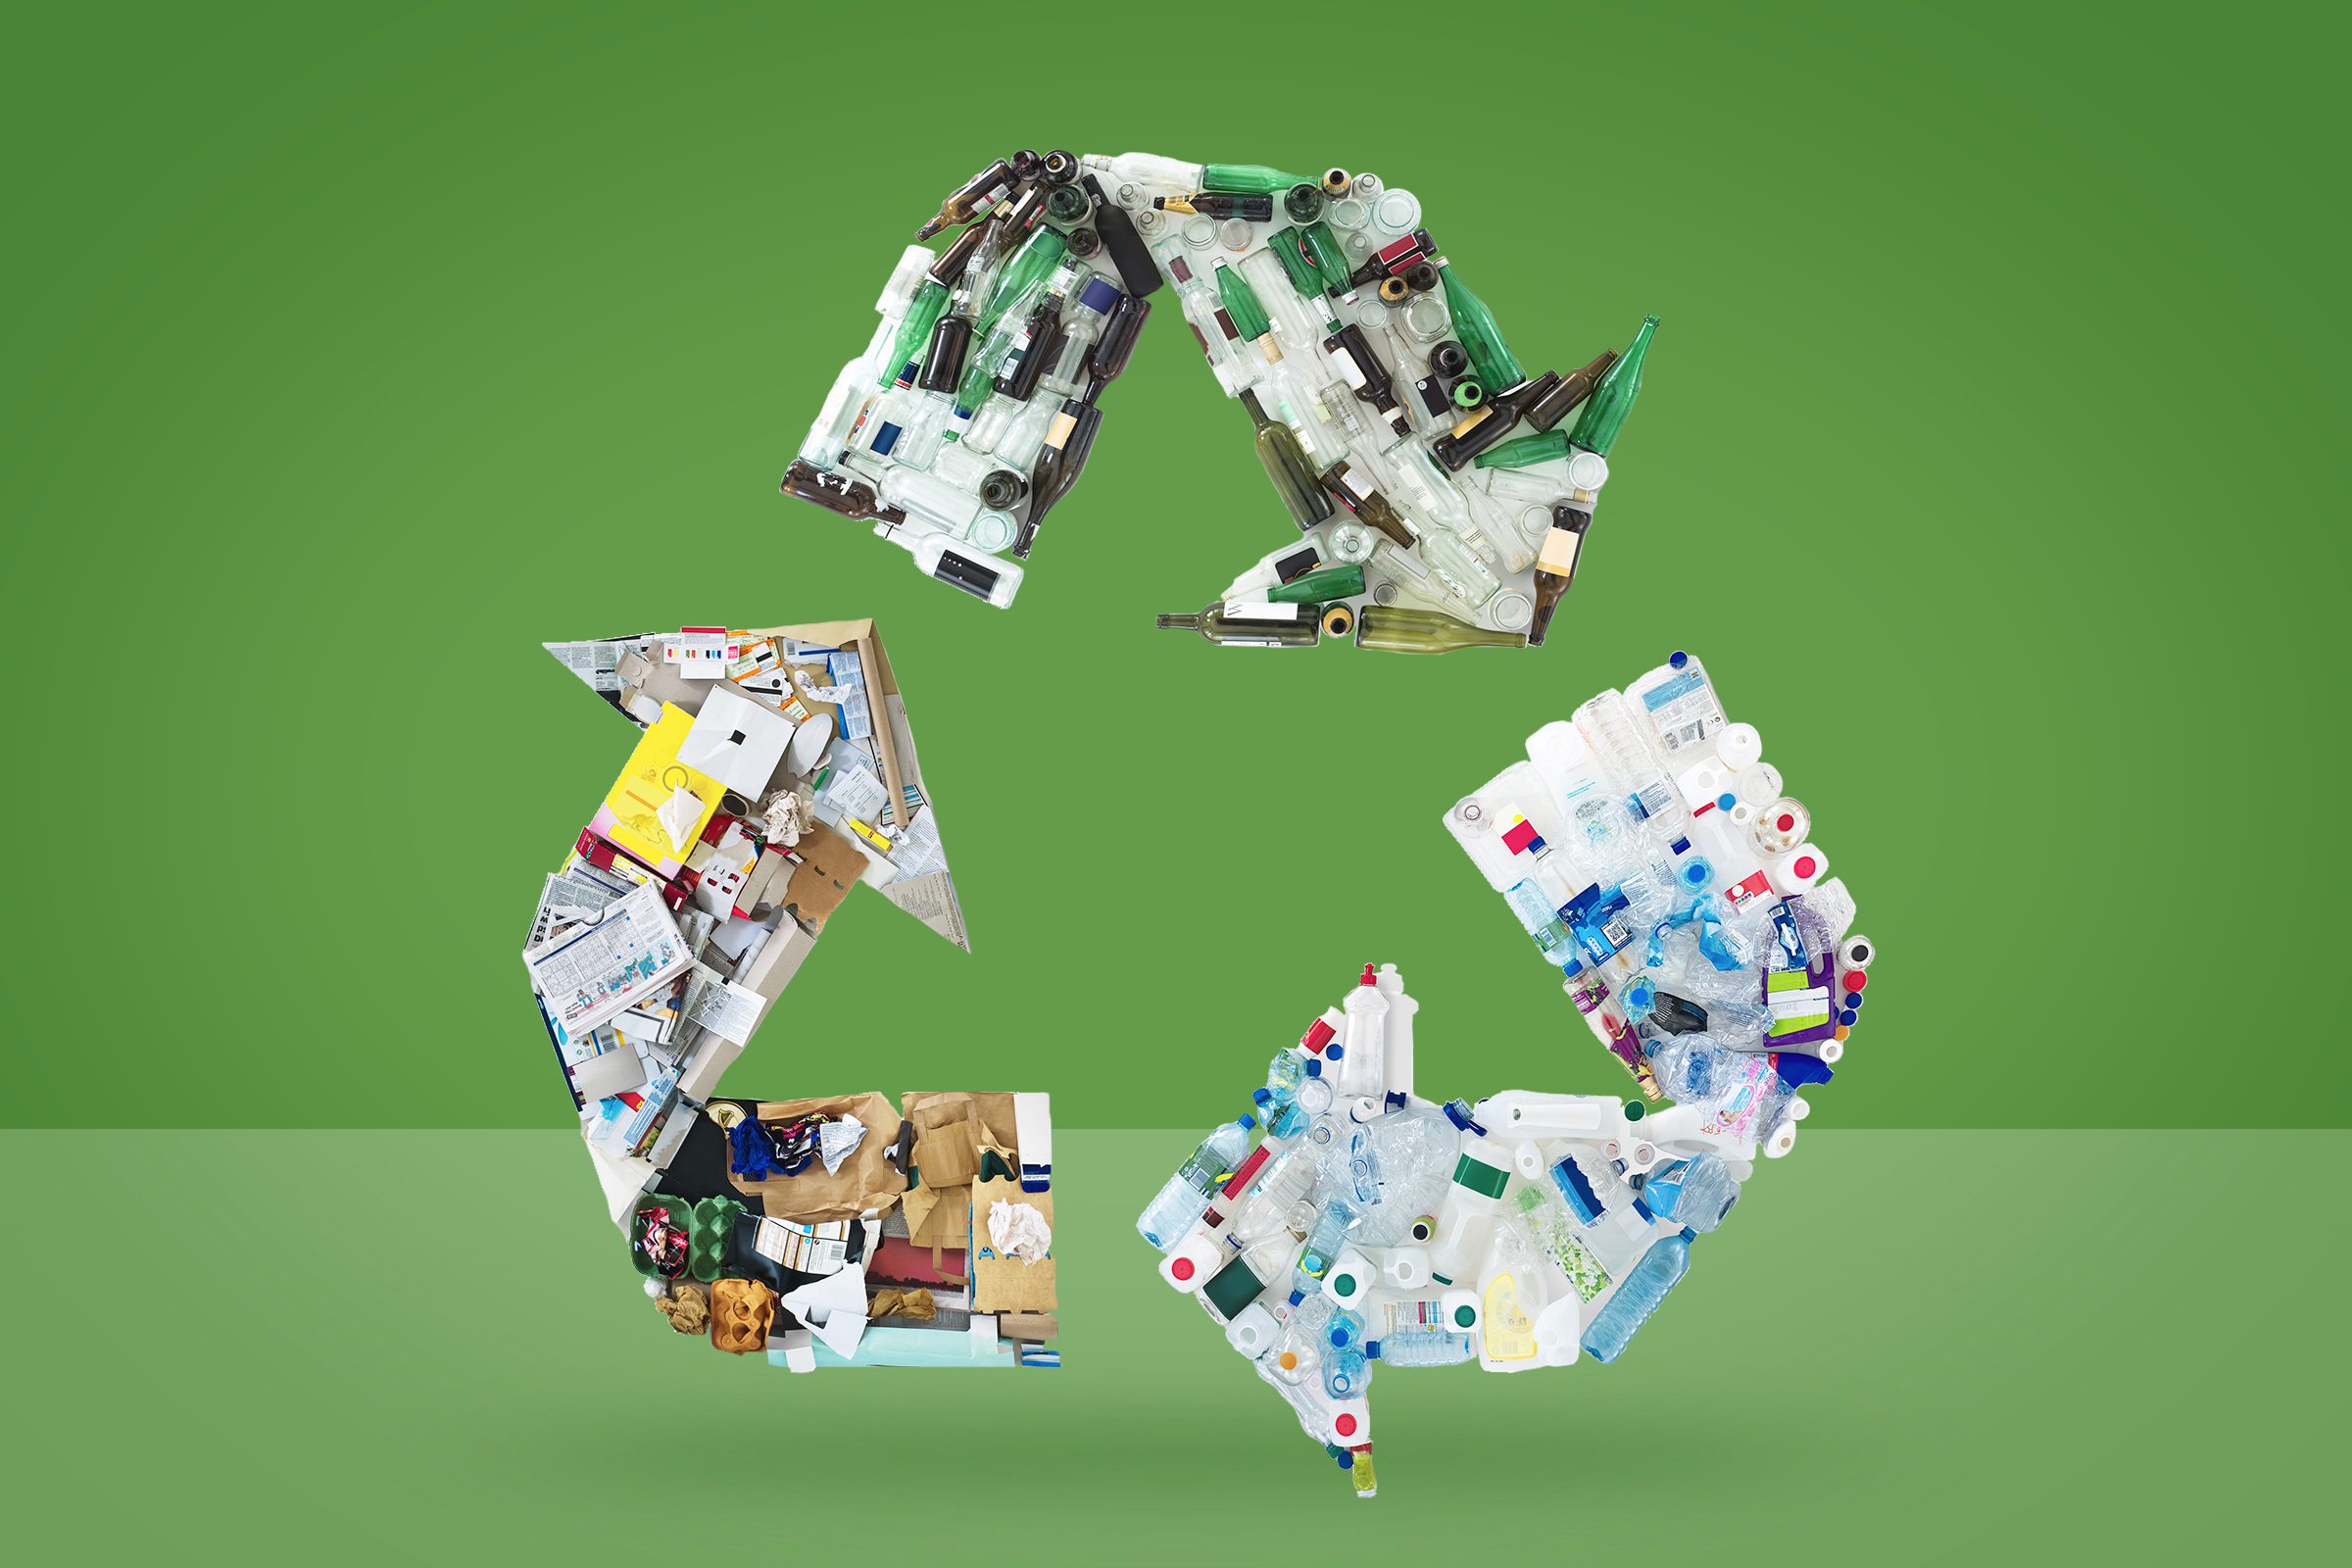 Aluminum Foil Recycling (5 Must-Know Tips for Work)